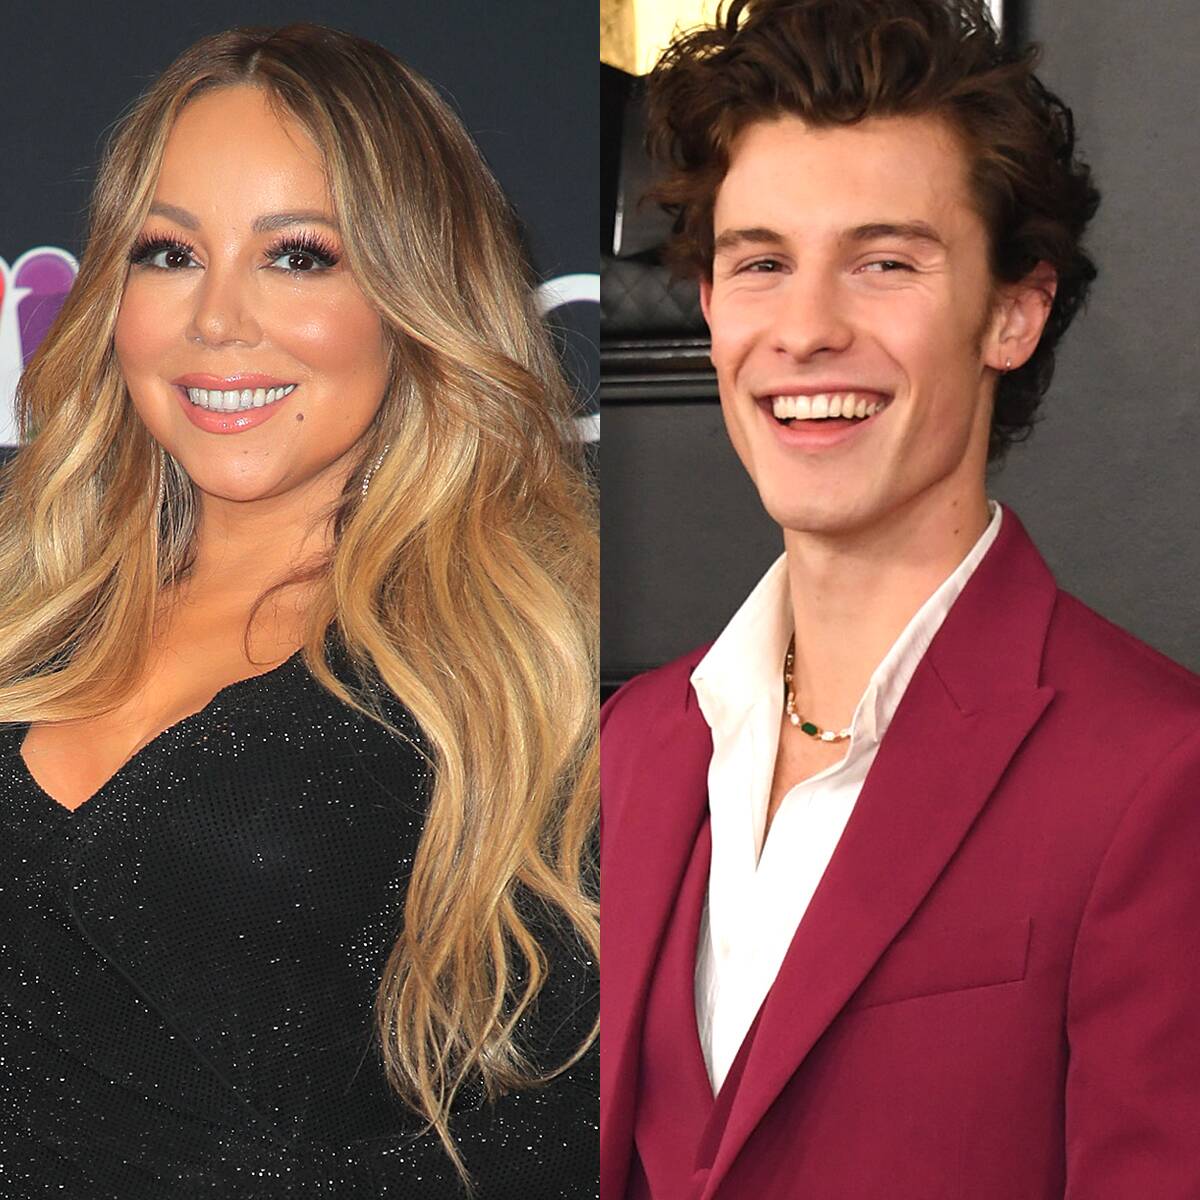 Check Out Mariah Carey’s Spot-On Recreation of Shawn Mendes’ Instagram Shout Out